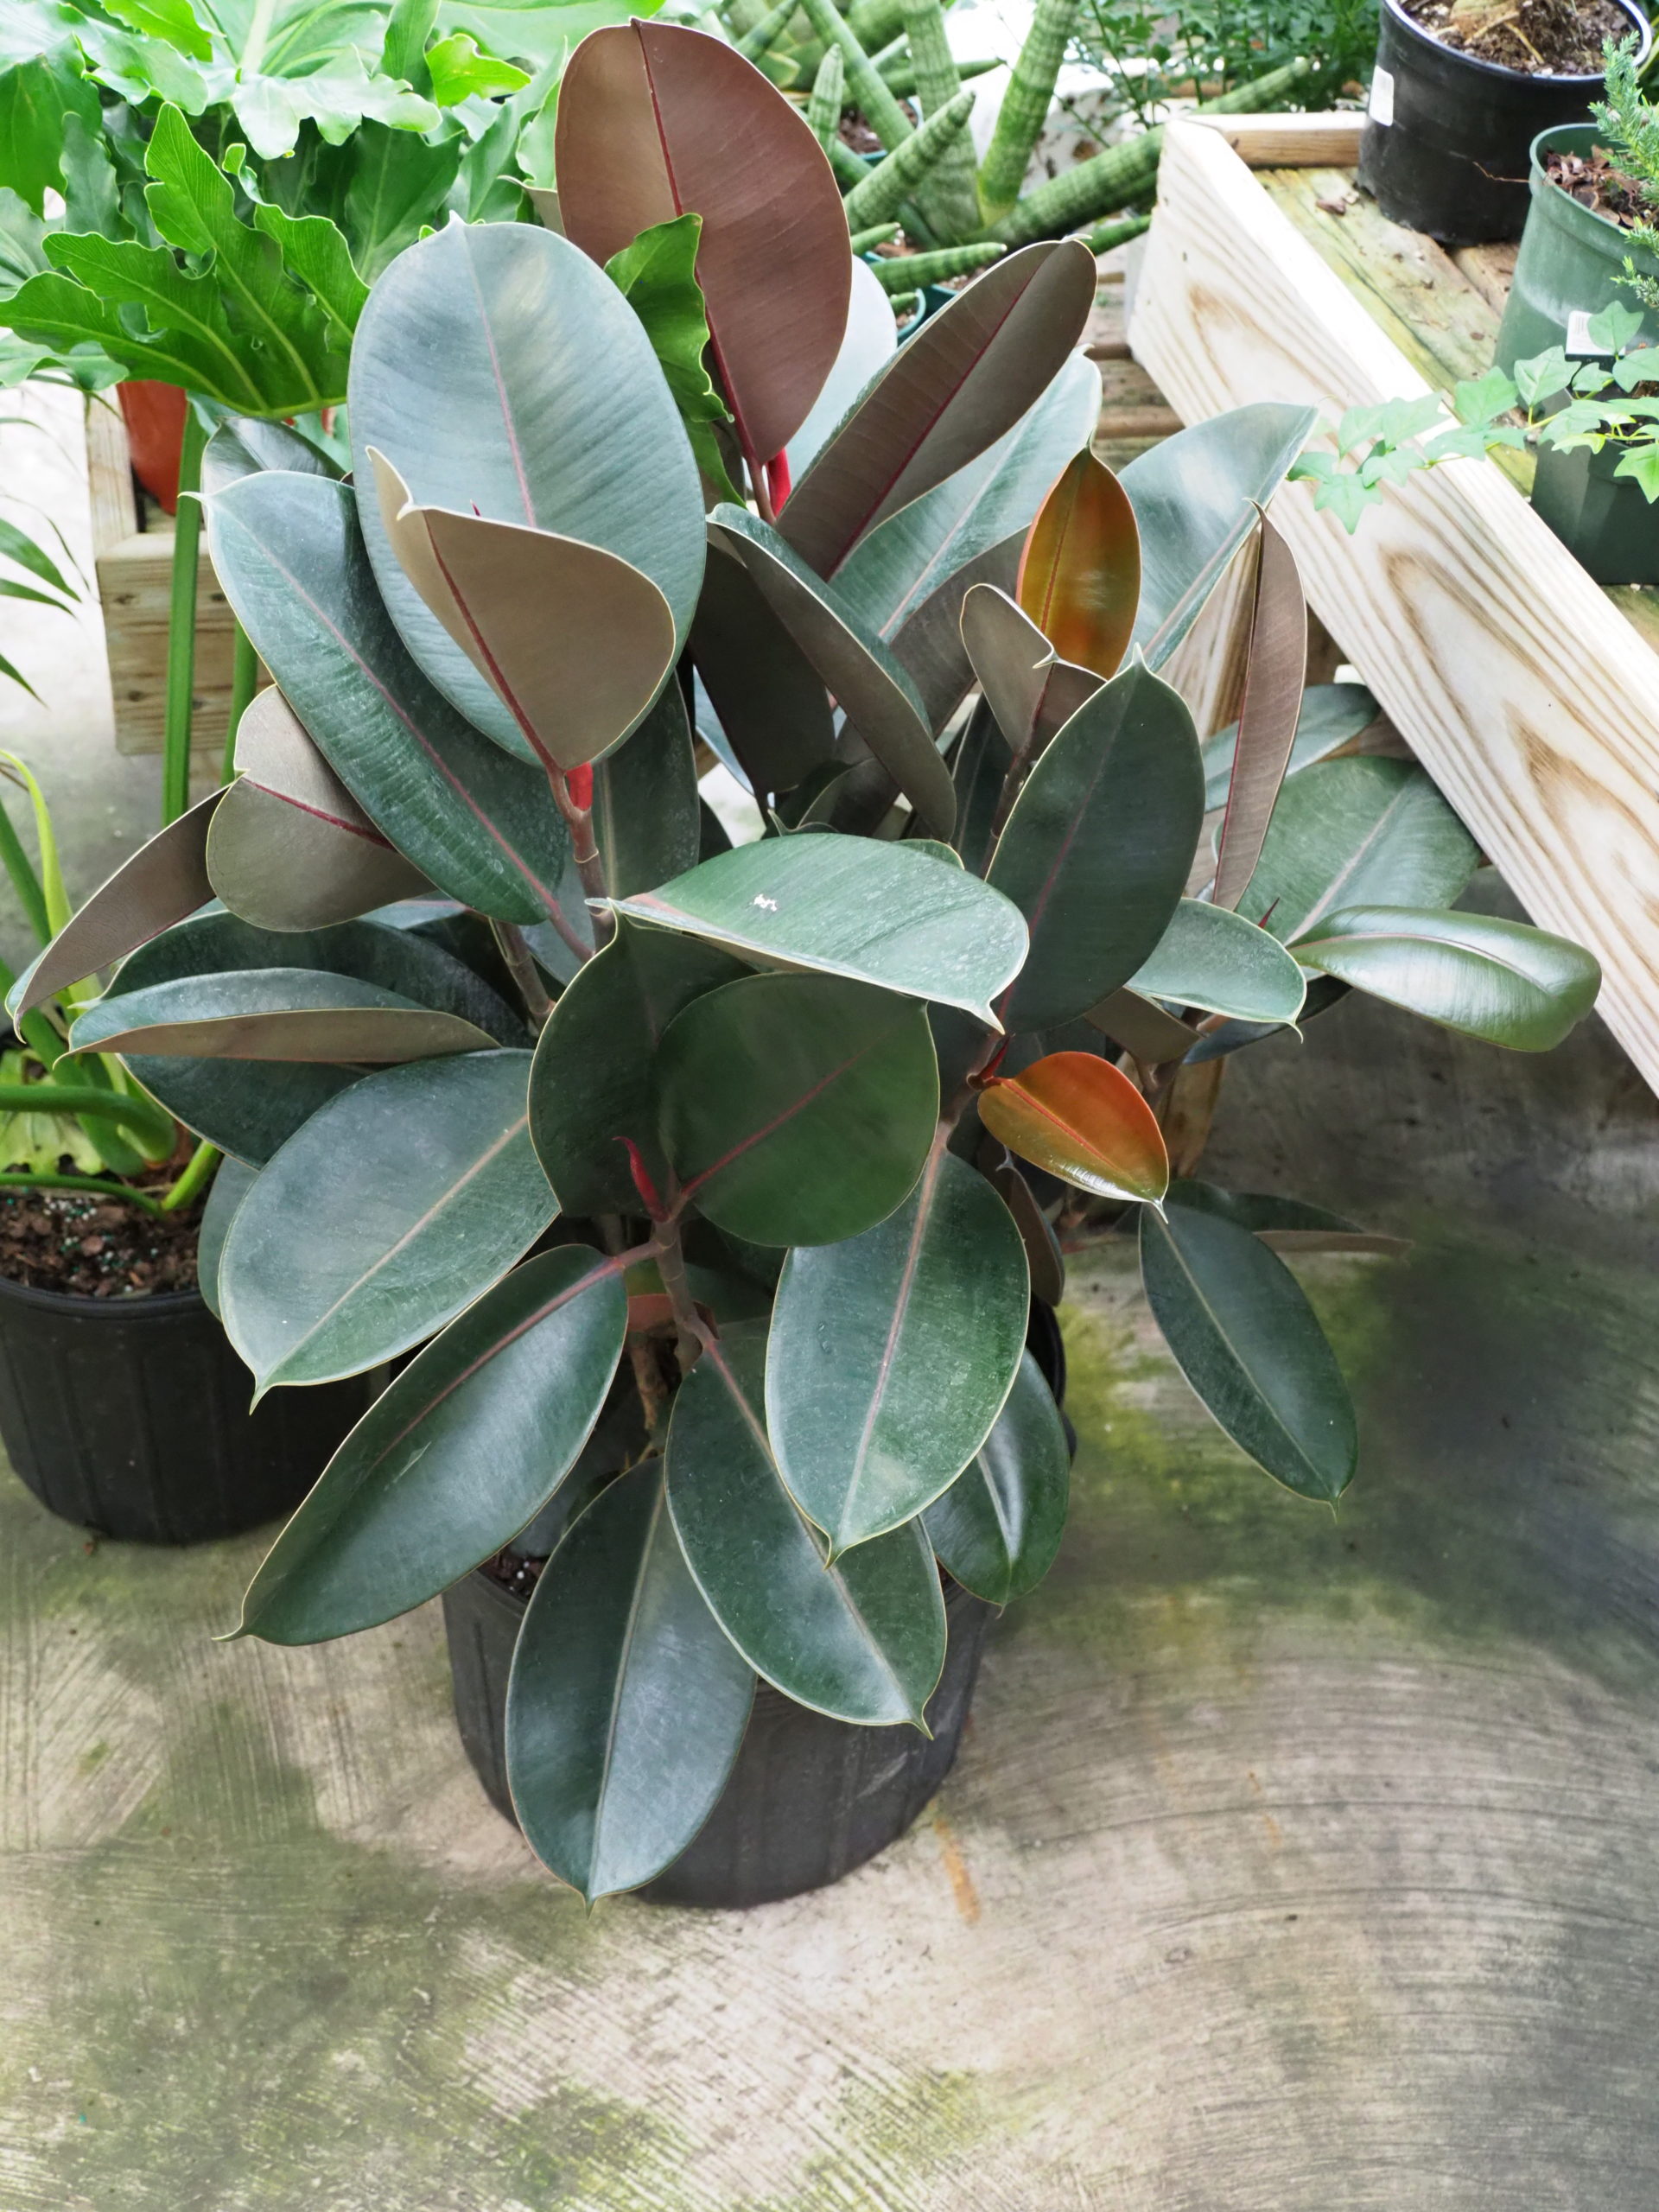 Among the Ficus, the decora varieties make good, low-maintenance houseplants. Some varieties have dark to almost black foliage while others can have hints of red, green and white. Fast growing but easily pruned to maintain size and shape.